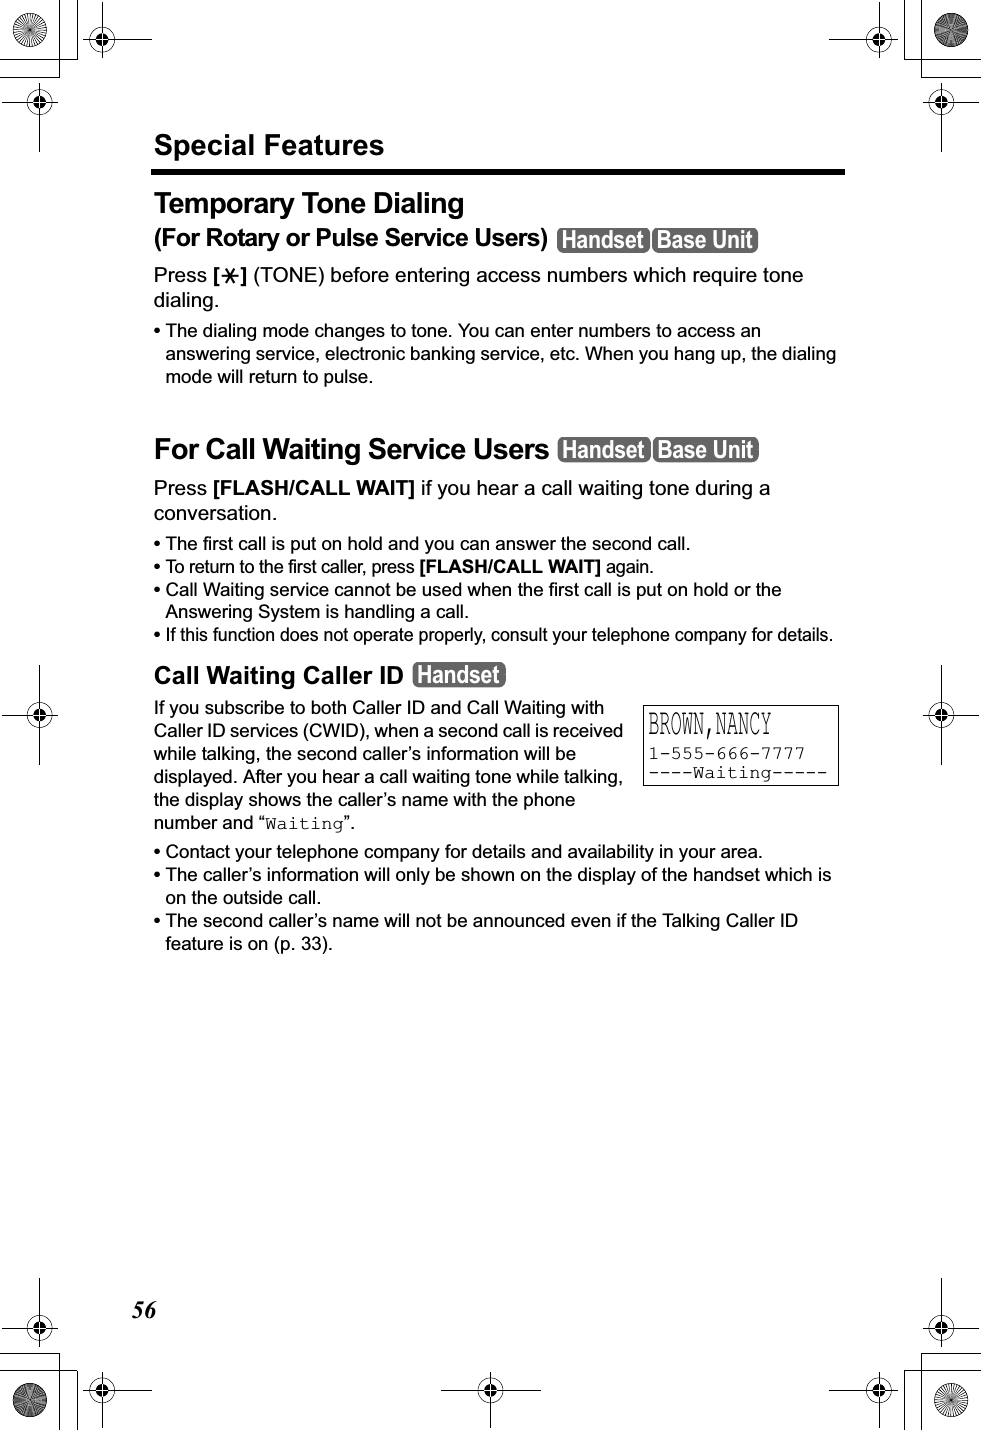 Special Features56Temporary Tone Dialing(For Rotary or Pulse Service Users) Press [*] (TONE) before entering access numbers which require tone dialing.•The dialing mode changes to tone. You can enter numbers to access an answering service, electronic banking service, etc. When you hang up, the dialing mode will return to pulse.For Call Waiting Service Users Press [FLASH/CALL WAIT] if you hear a call waiting tone during a conversation.•The first call is put on hold and you can answer the second call.•To return to the first caller, press [FLASH/CALL WAIT] again.•Call Waiting service cannot be used when the first call is put on hold or the Answering System is handling a call.•If this function does not operate properly, consult your telephone company for details.Call Waiting Caller IDIf you subscribe to both Caller ID and Call Waiting with Caller ID services (CWID), when a second call is received while talking, the second caller’s information will be displayed. After you hear a call waiting tone while talking, the display shows the caller’s name with the phone number and “Waiting”.•Contact your telephone company for details and availability in your area.•The caller’s information will only be shown on the display of the handset which is on the outside call.•The second caller’s name will not be announced even if the Talking Caller ID feature is on (p. 33).Handset Base UnitHandset Base UnitHandsetBROWN,NANCY1-555-666-7777----Waiting-----